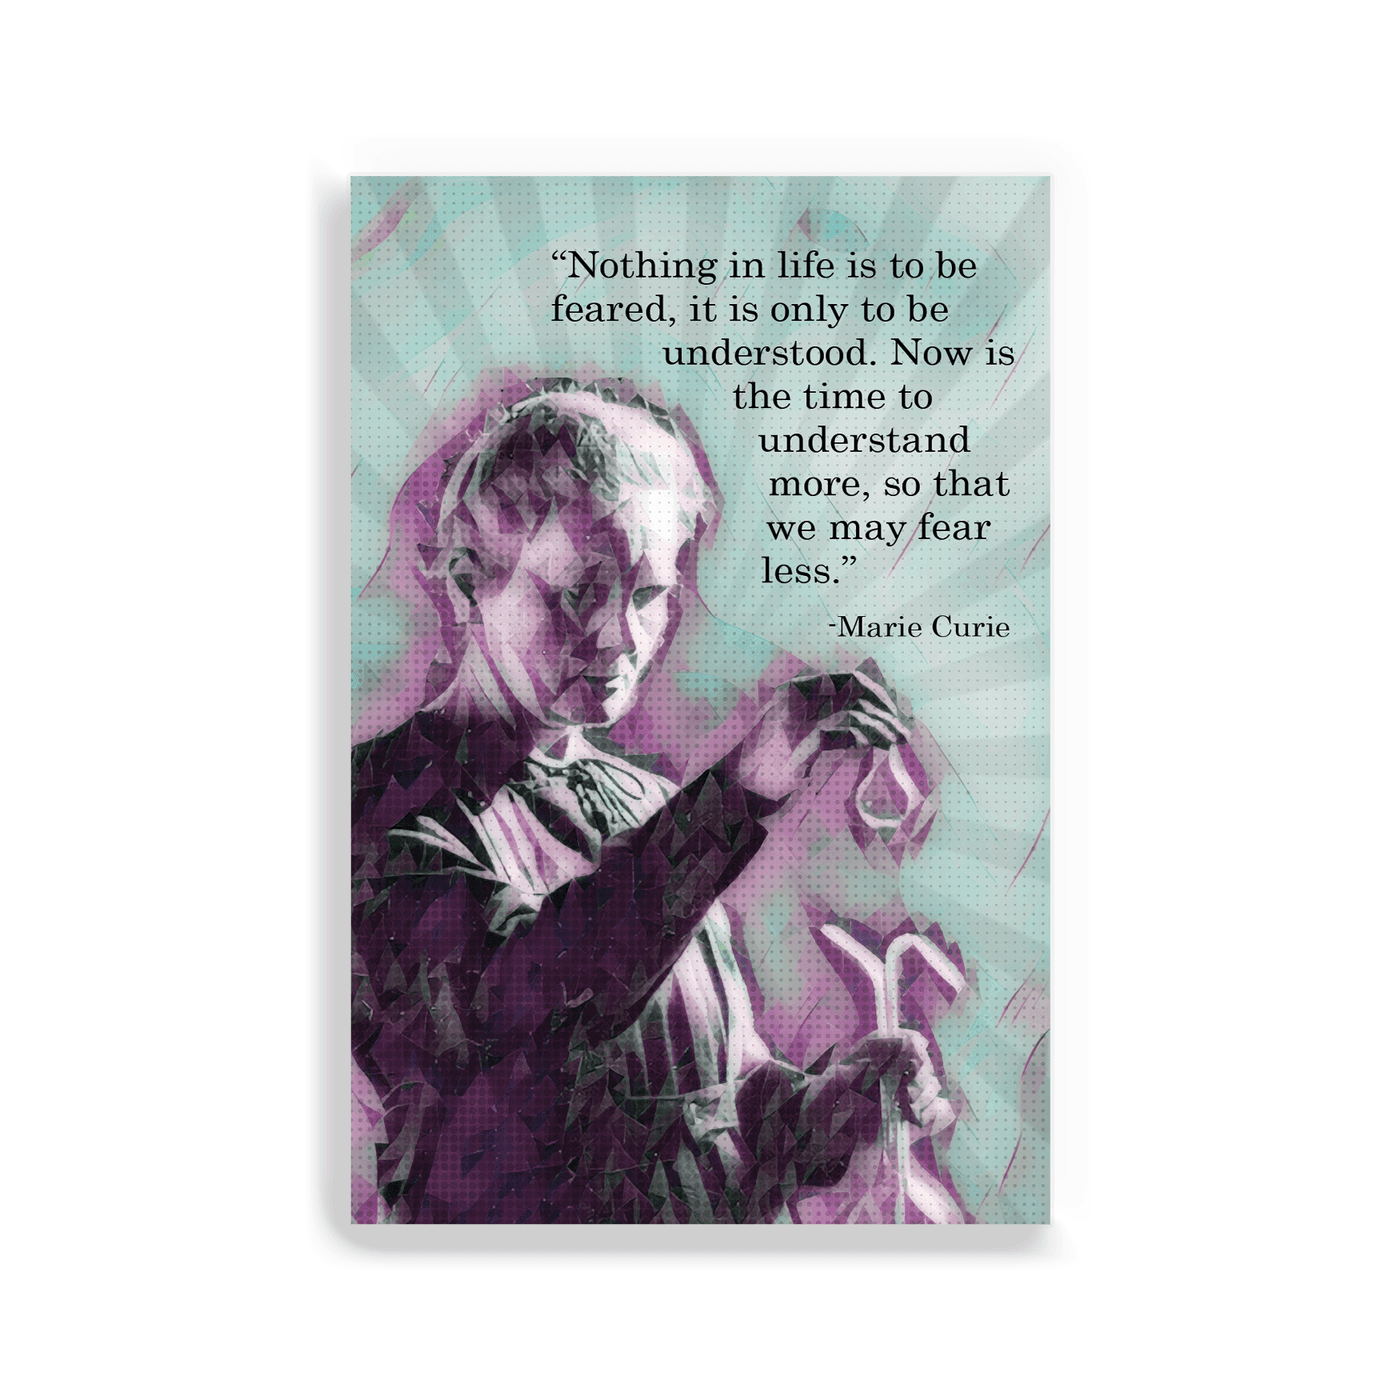 Marie Curie Quote - 2x3 Magnet